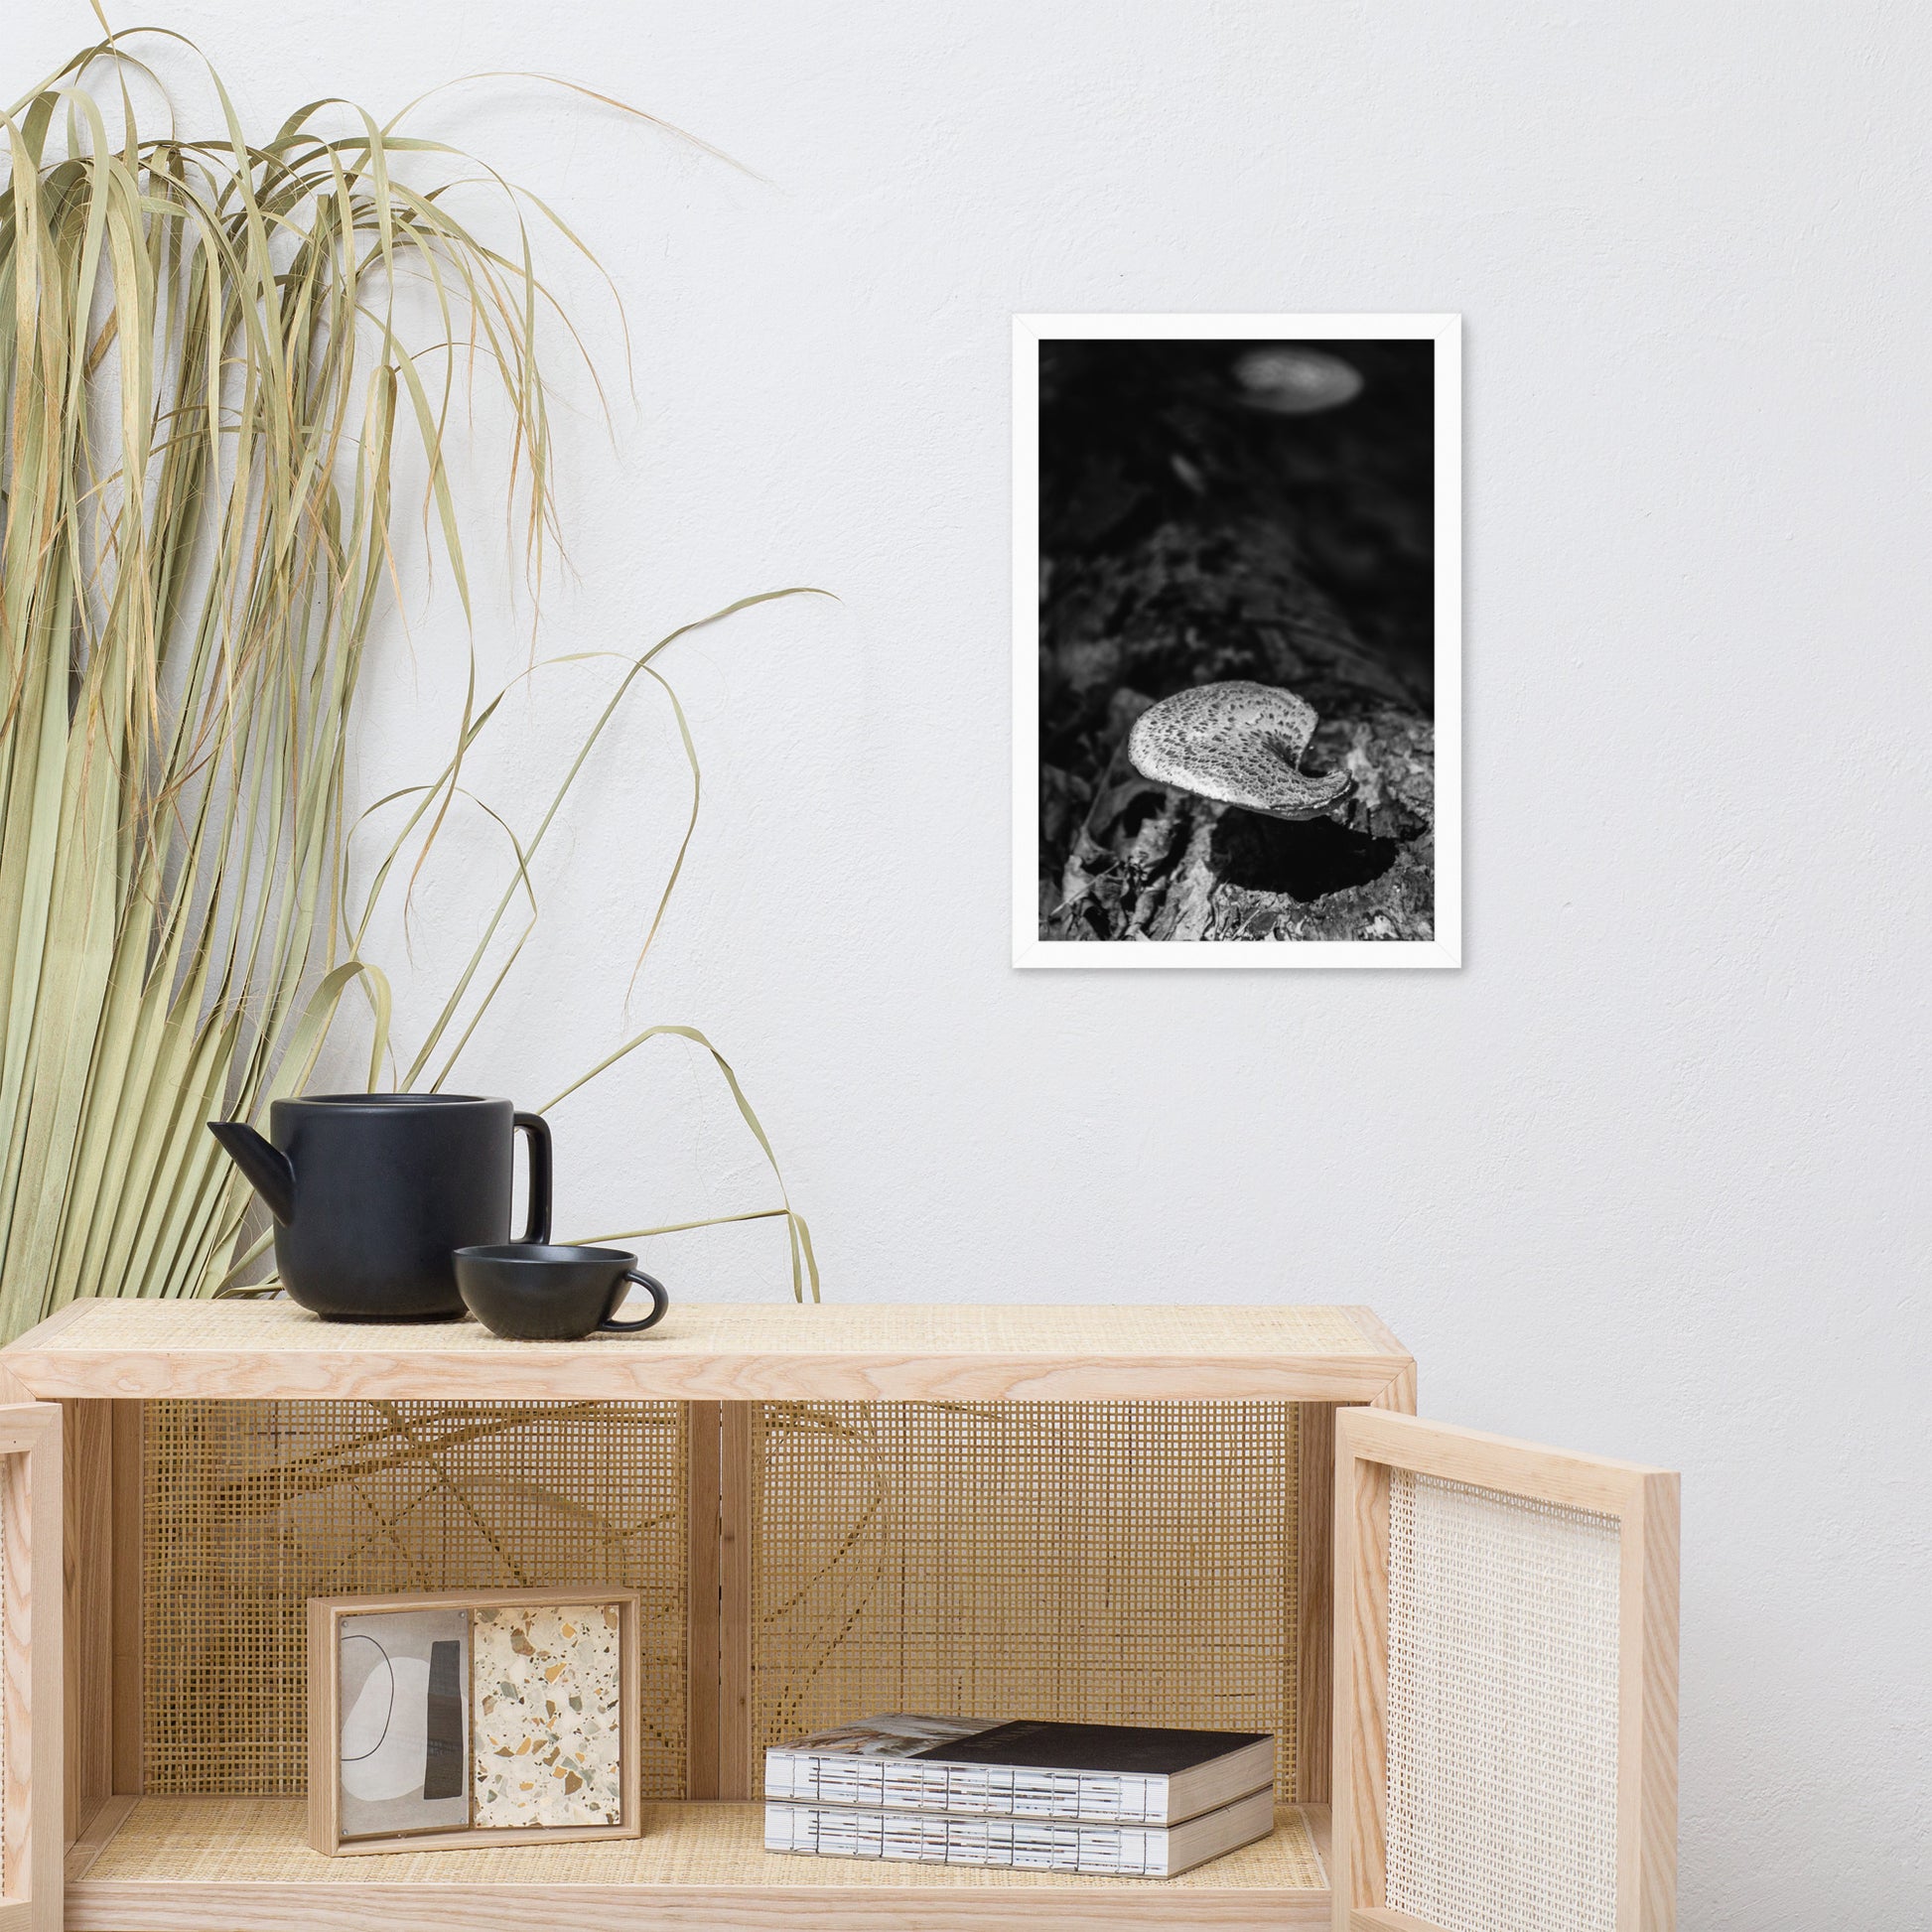 Rustic Country Wall Art: Mushroom on Log in Black and White Botanical Nature Photo Framed Wall Art Print